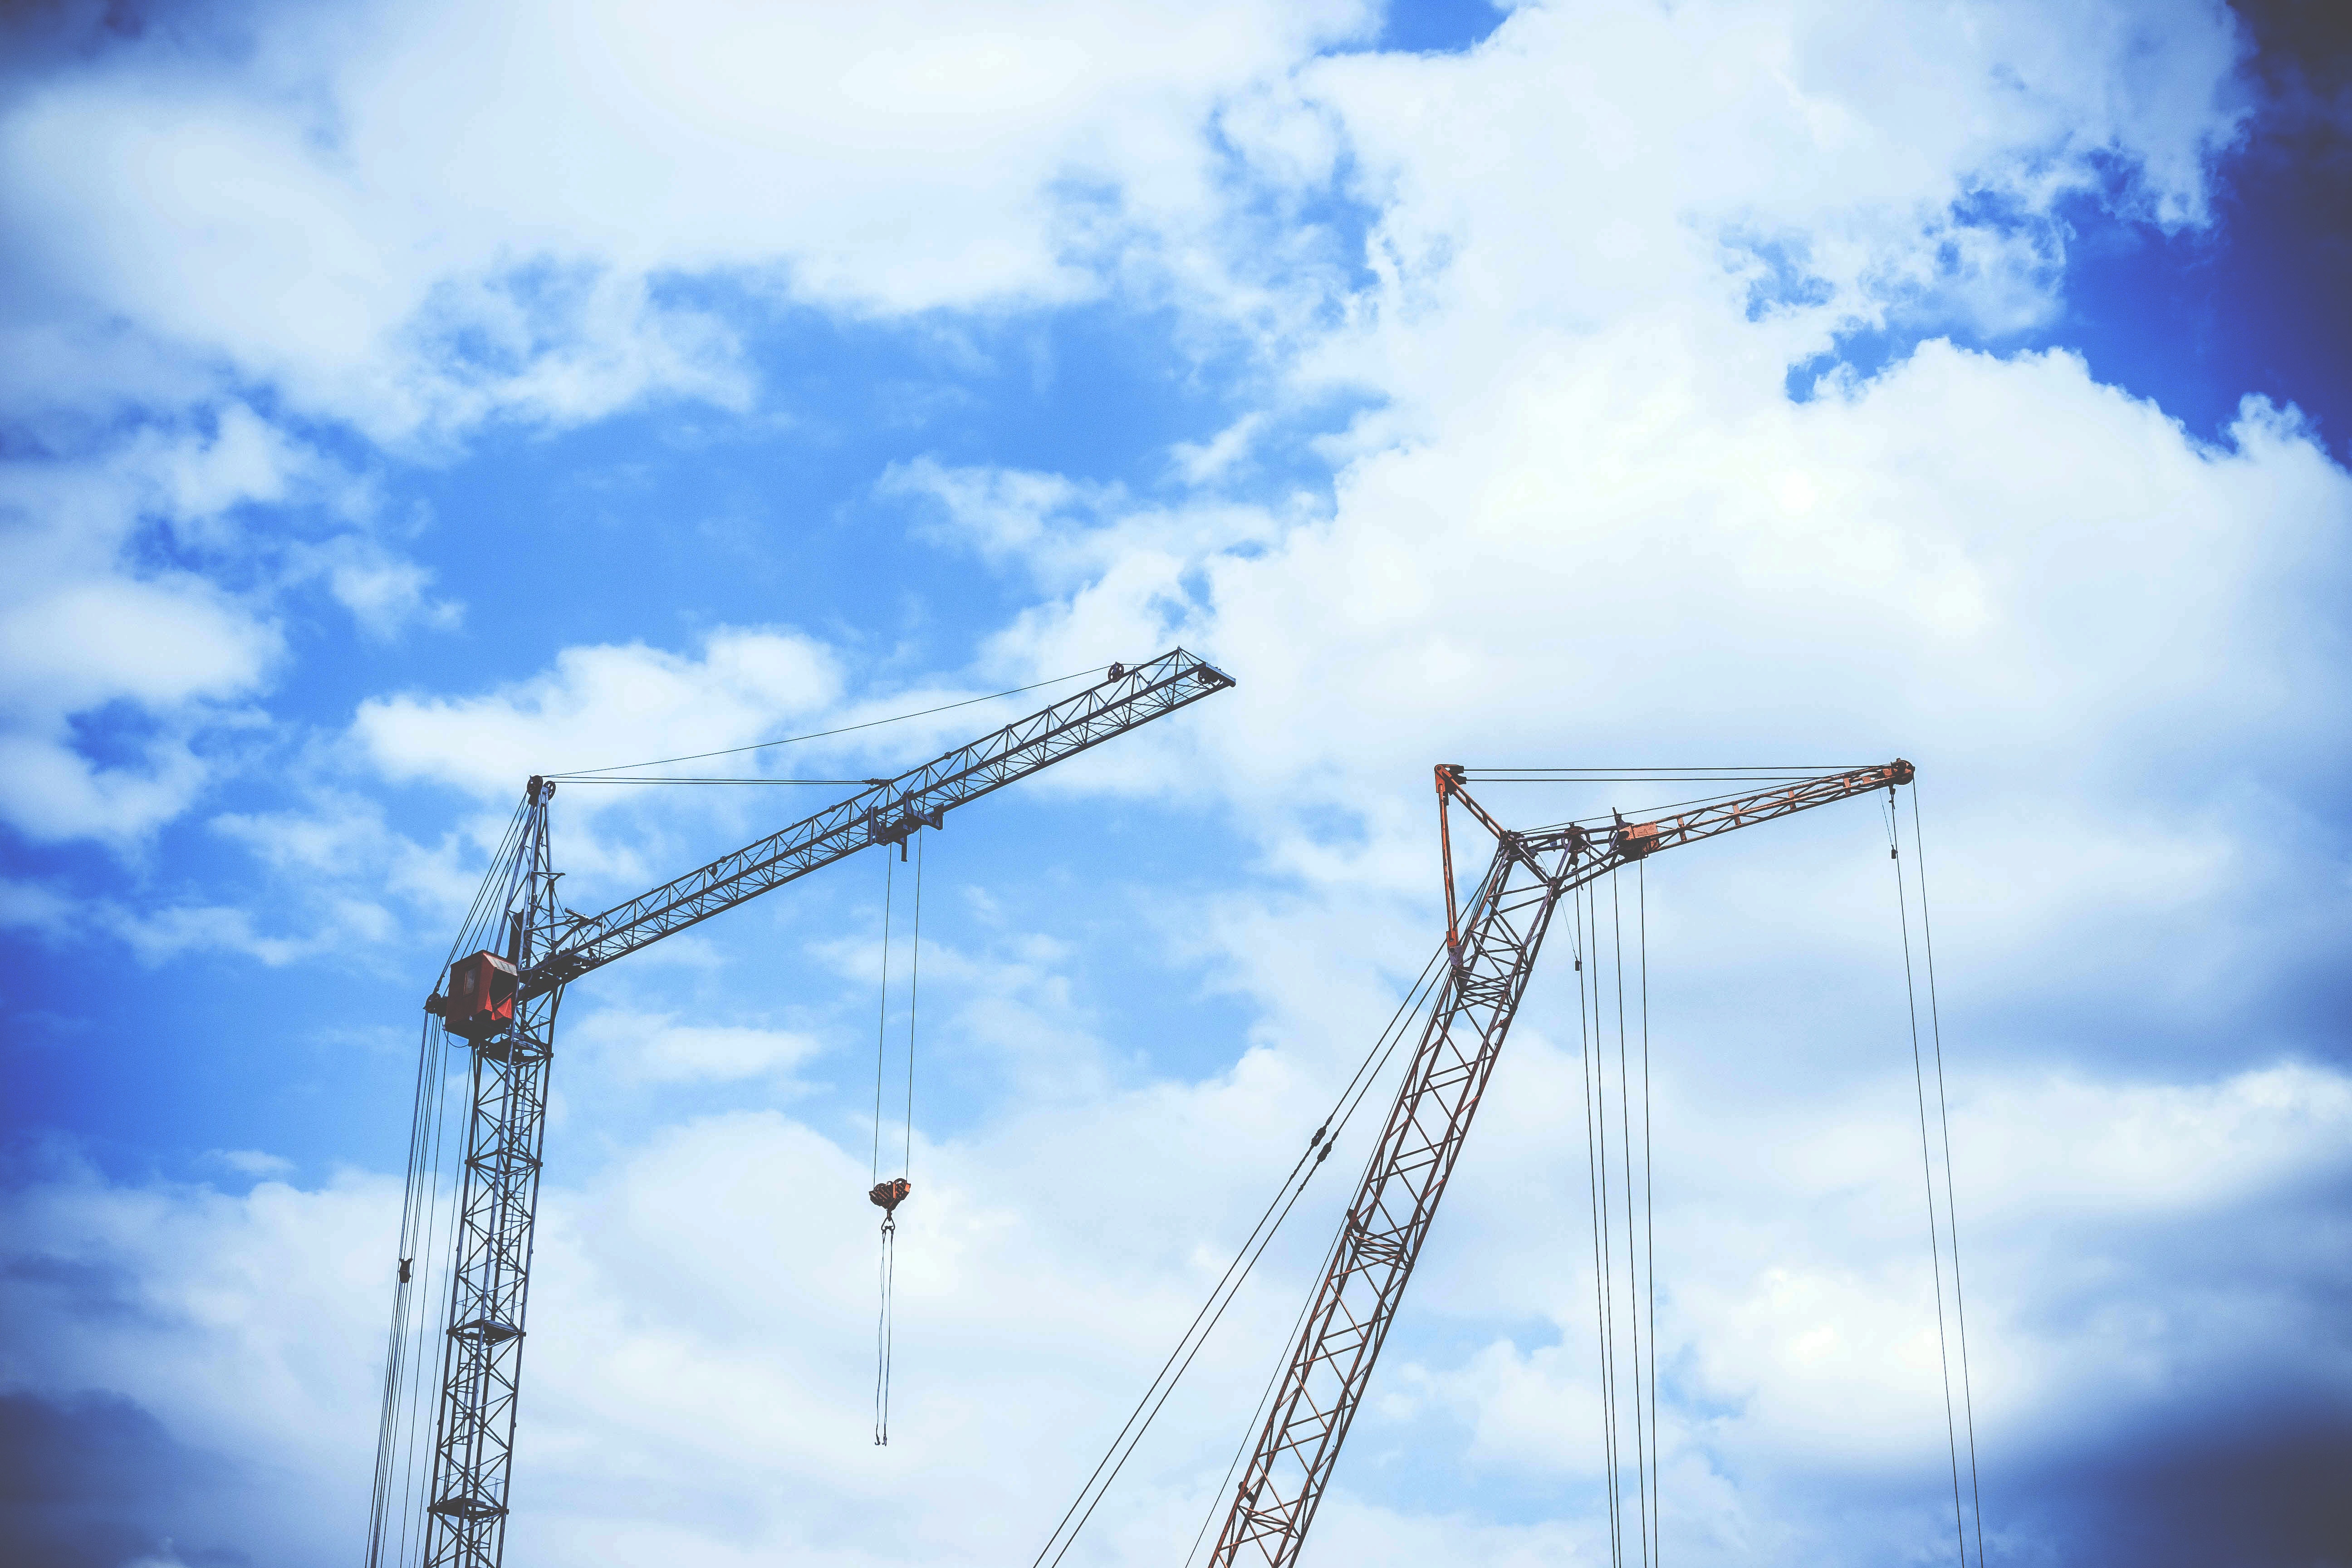 Gray rectangular power crane with blue cumulus clouds above as background during daytime photo